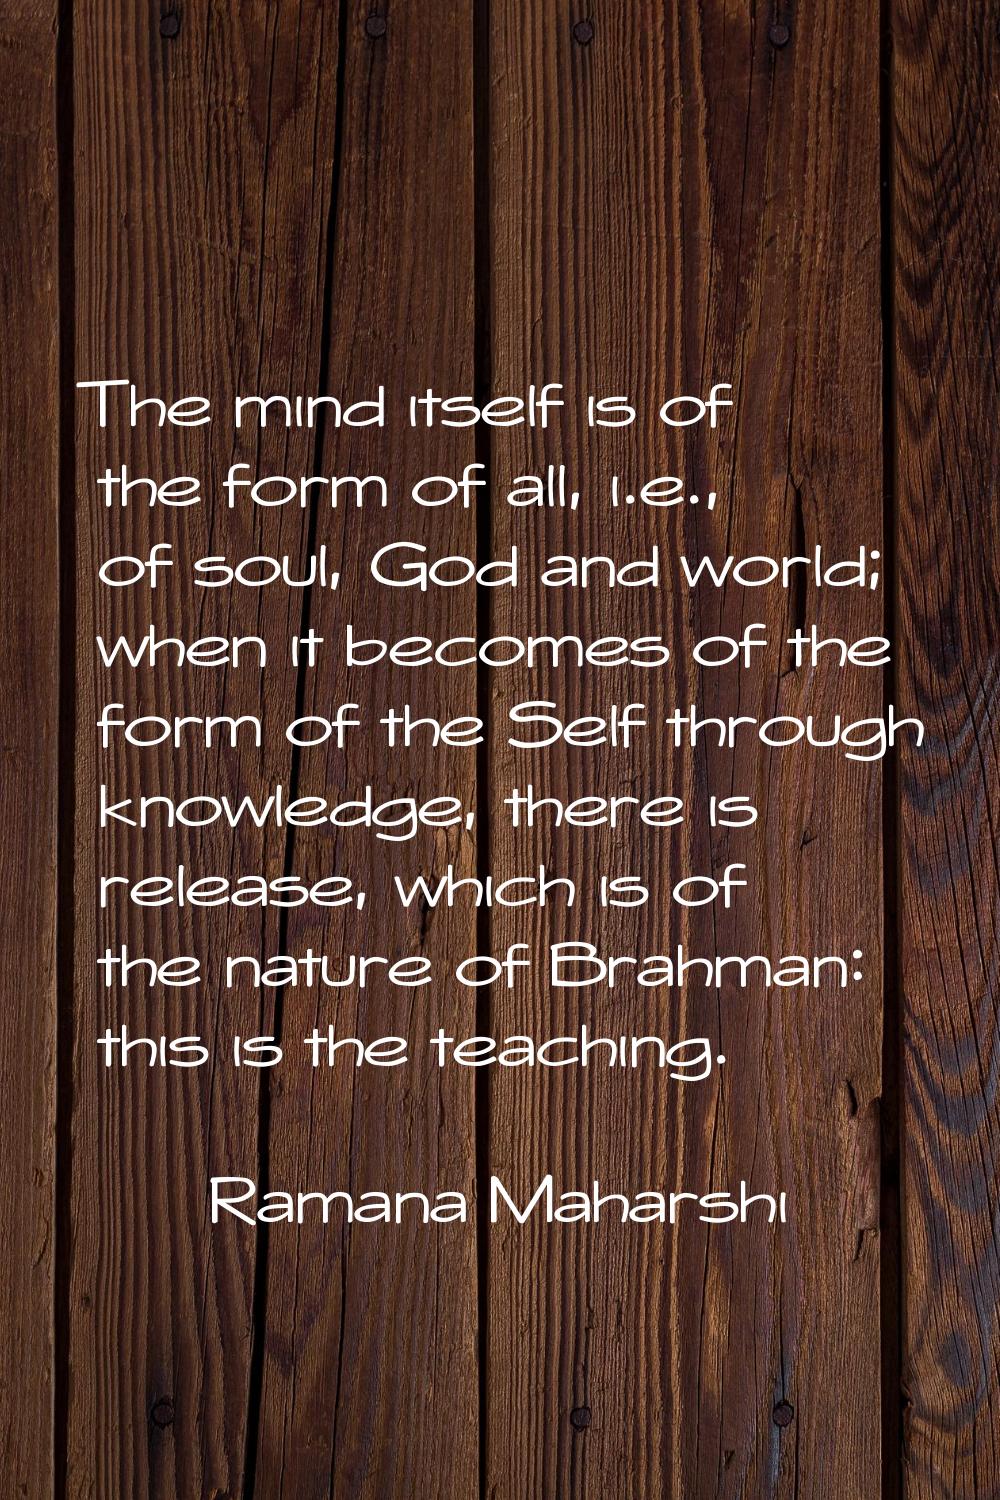 The mind itself is of the form of all, i.e., of soul, God and world; when it becomes of the form of